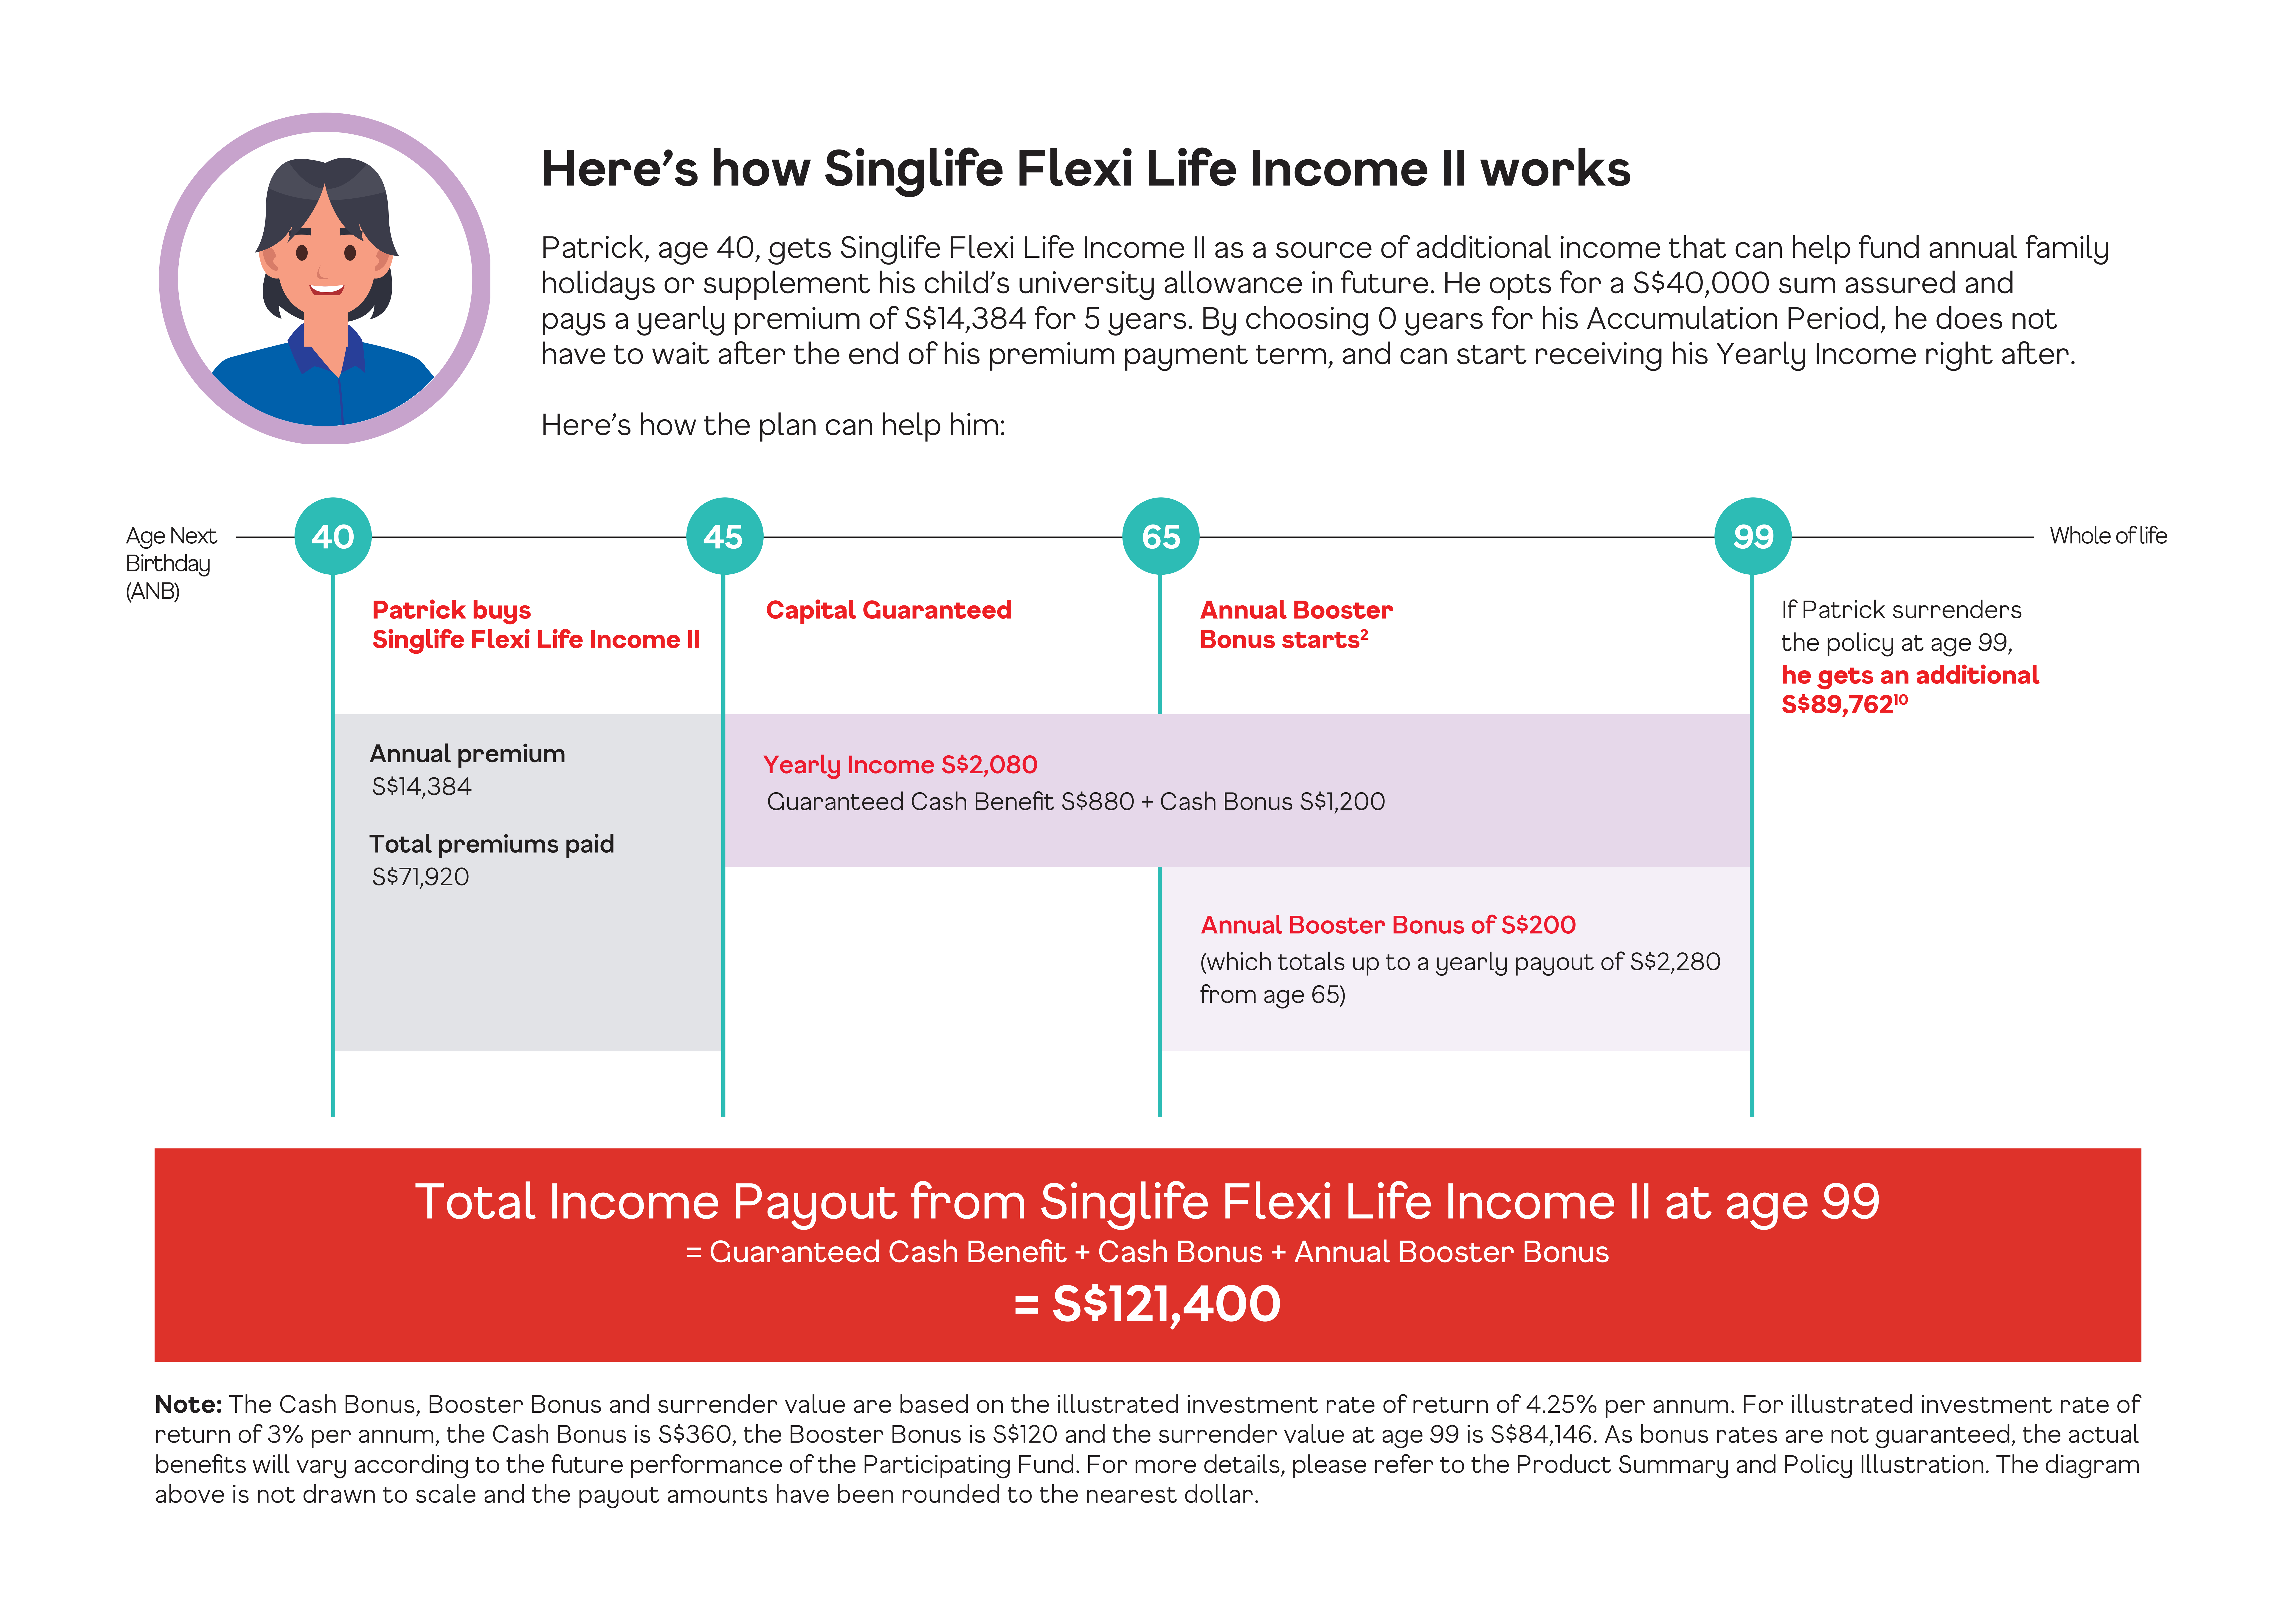 Singlife Flexi Life Income II Plan How It Works